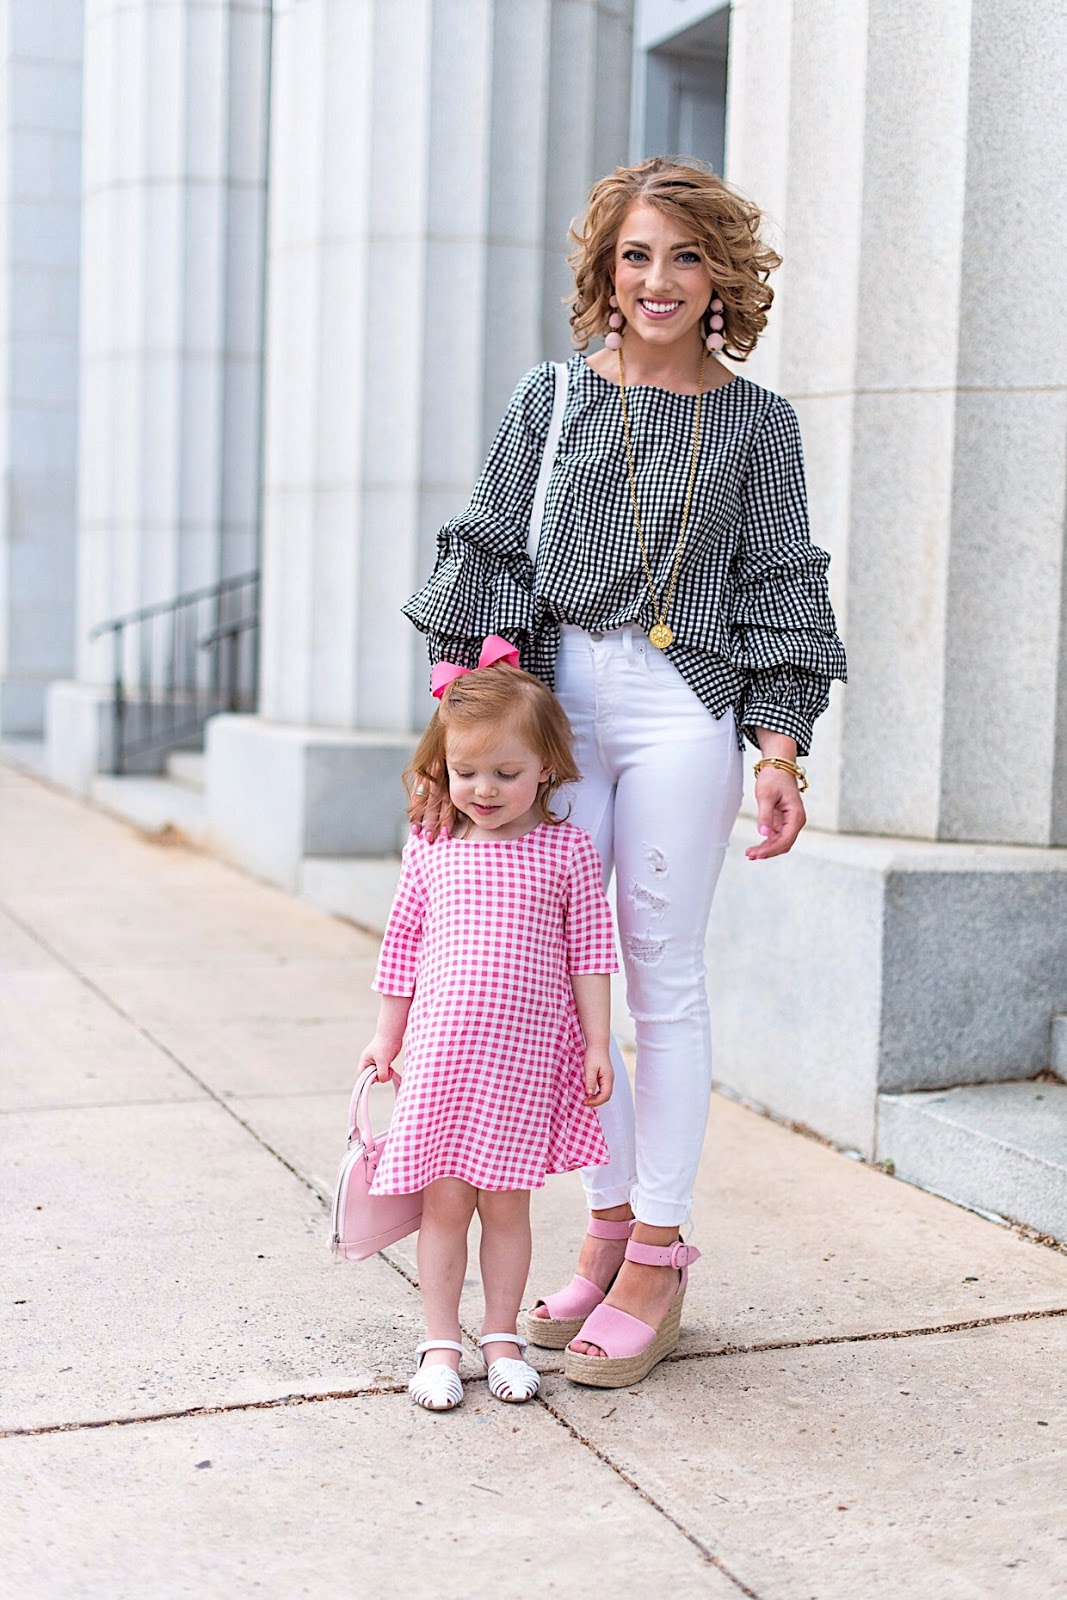 Mommy & Me in Gingham - Click through to see the full post on Something Delightful Blog